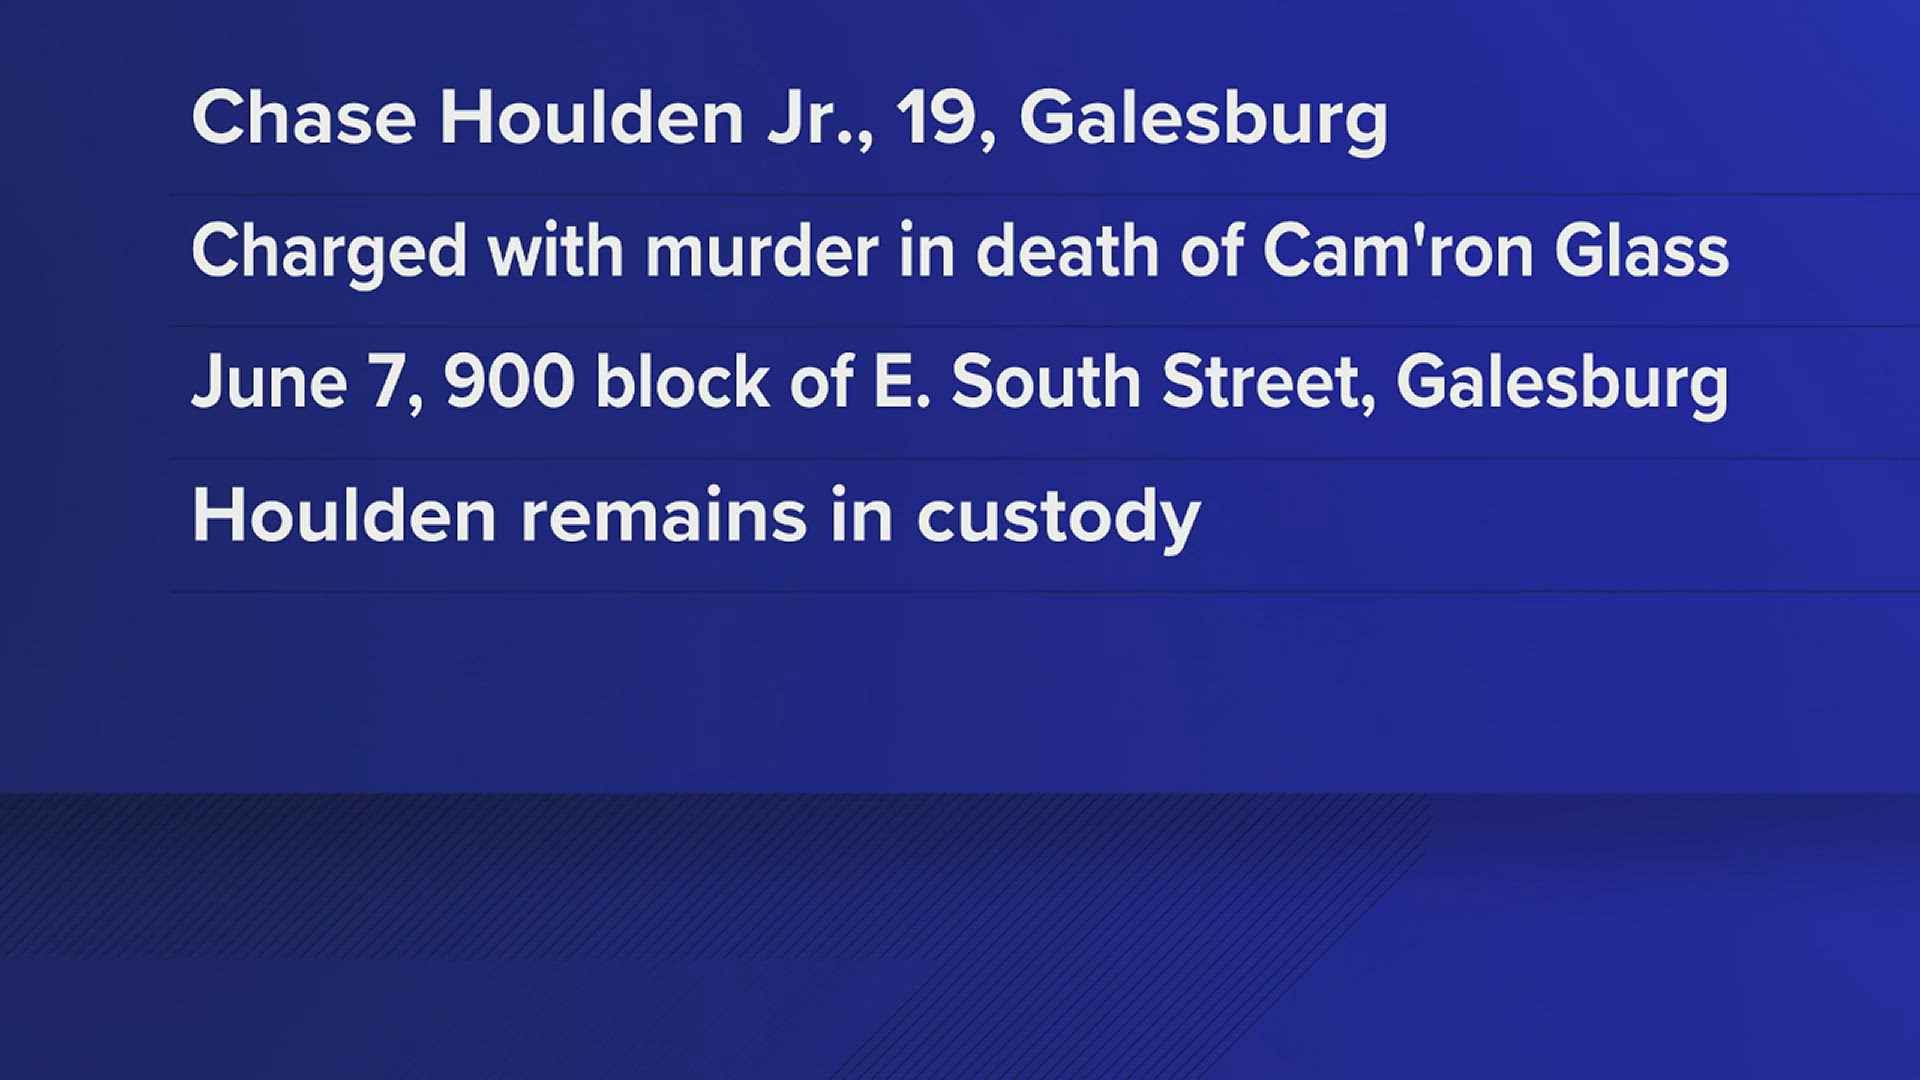 19-year-old Chase Houlden Jr. has been charged with murder in connection to a June 7 shooting that killed 18-year-old Cam'ron Glass.